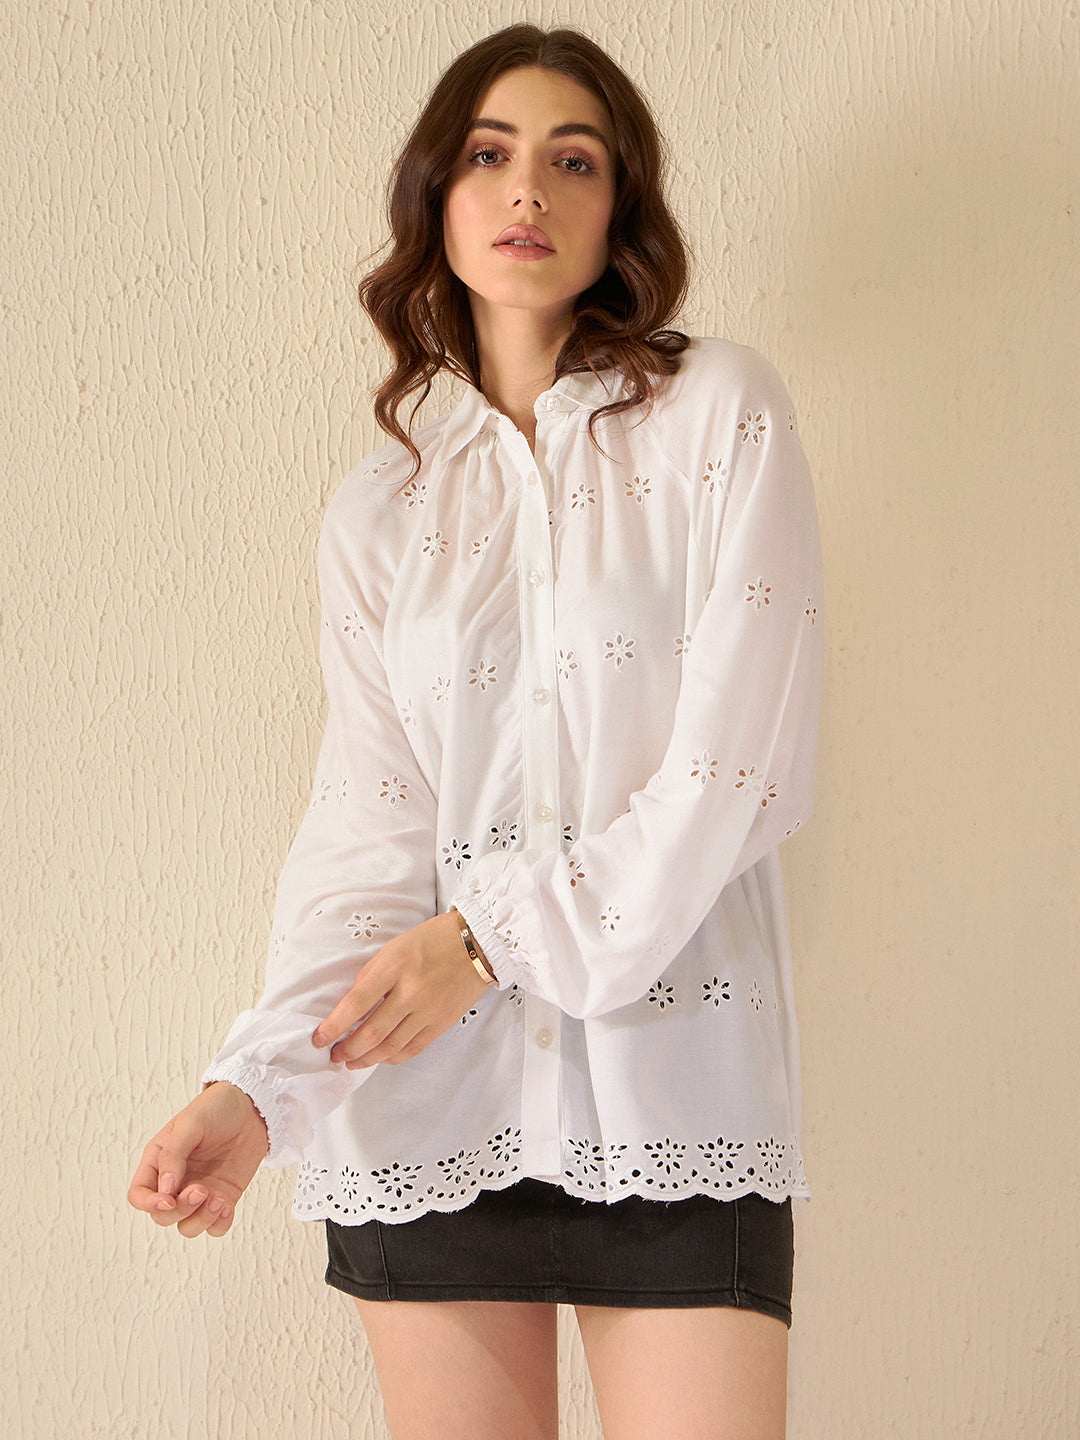 DENNISON Smart Floral Puff Sleeves Casual Longline Shirt